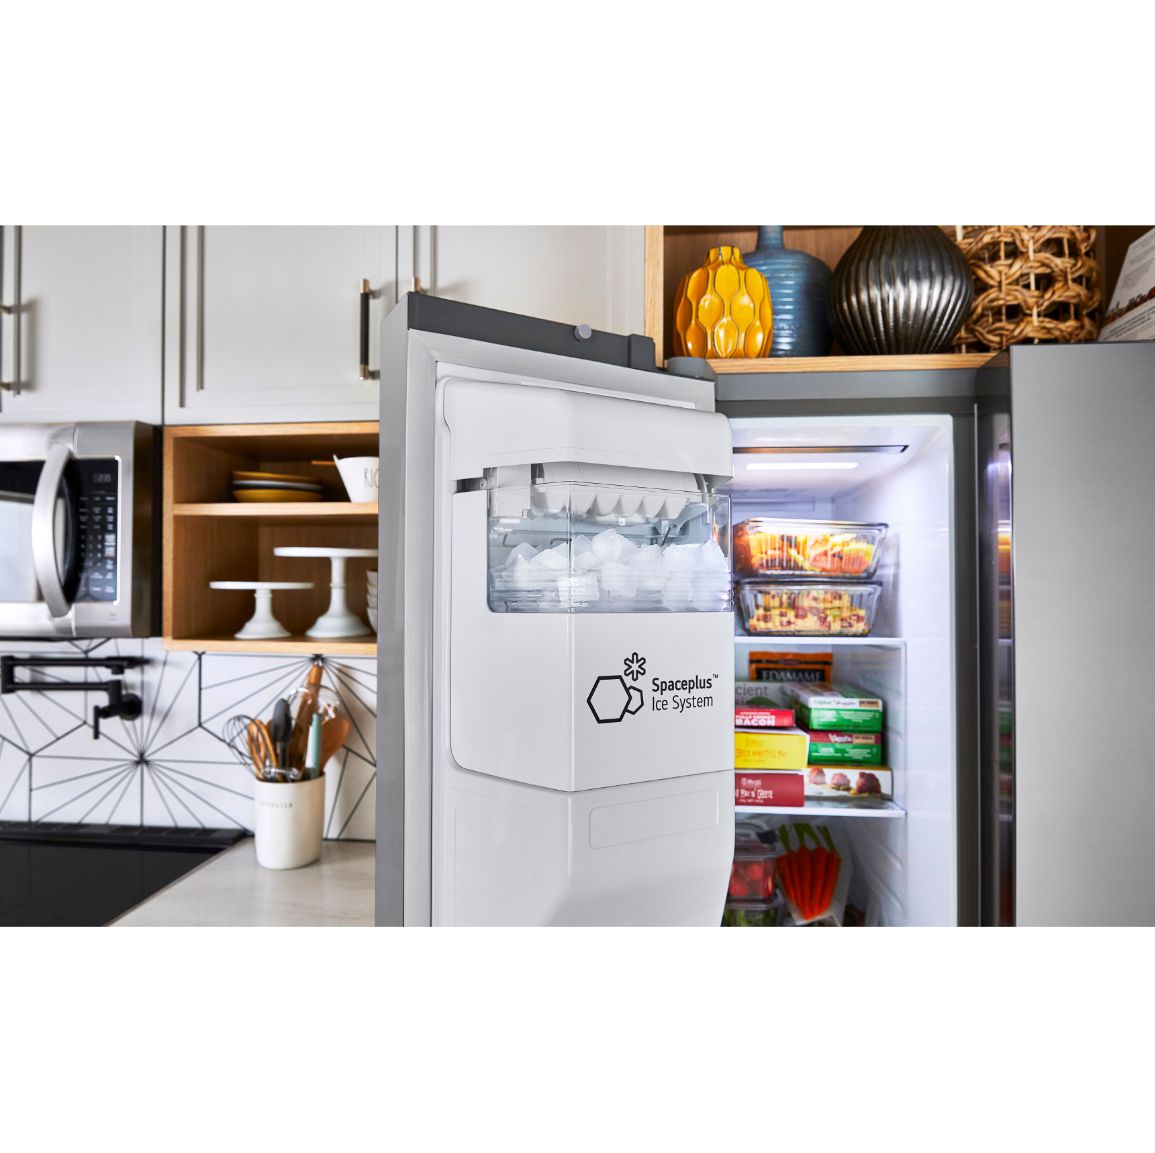 LG 36 Inch Side-by-Side Refrigerator in Stainless Steel Look 27 Cu. Ft. (LRSXS2706V)